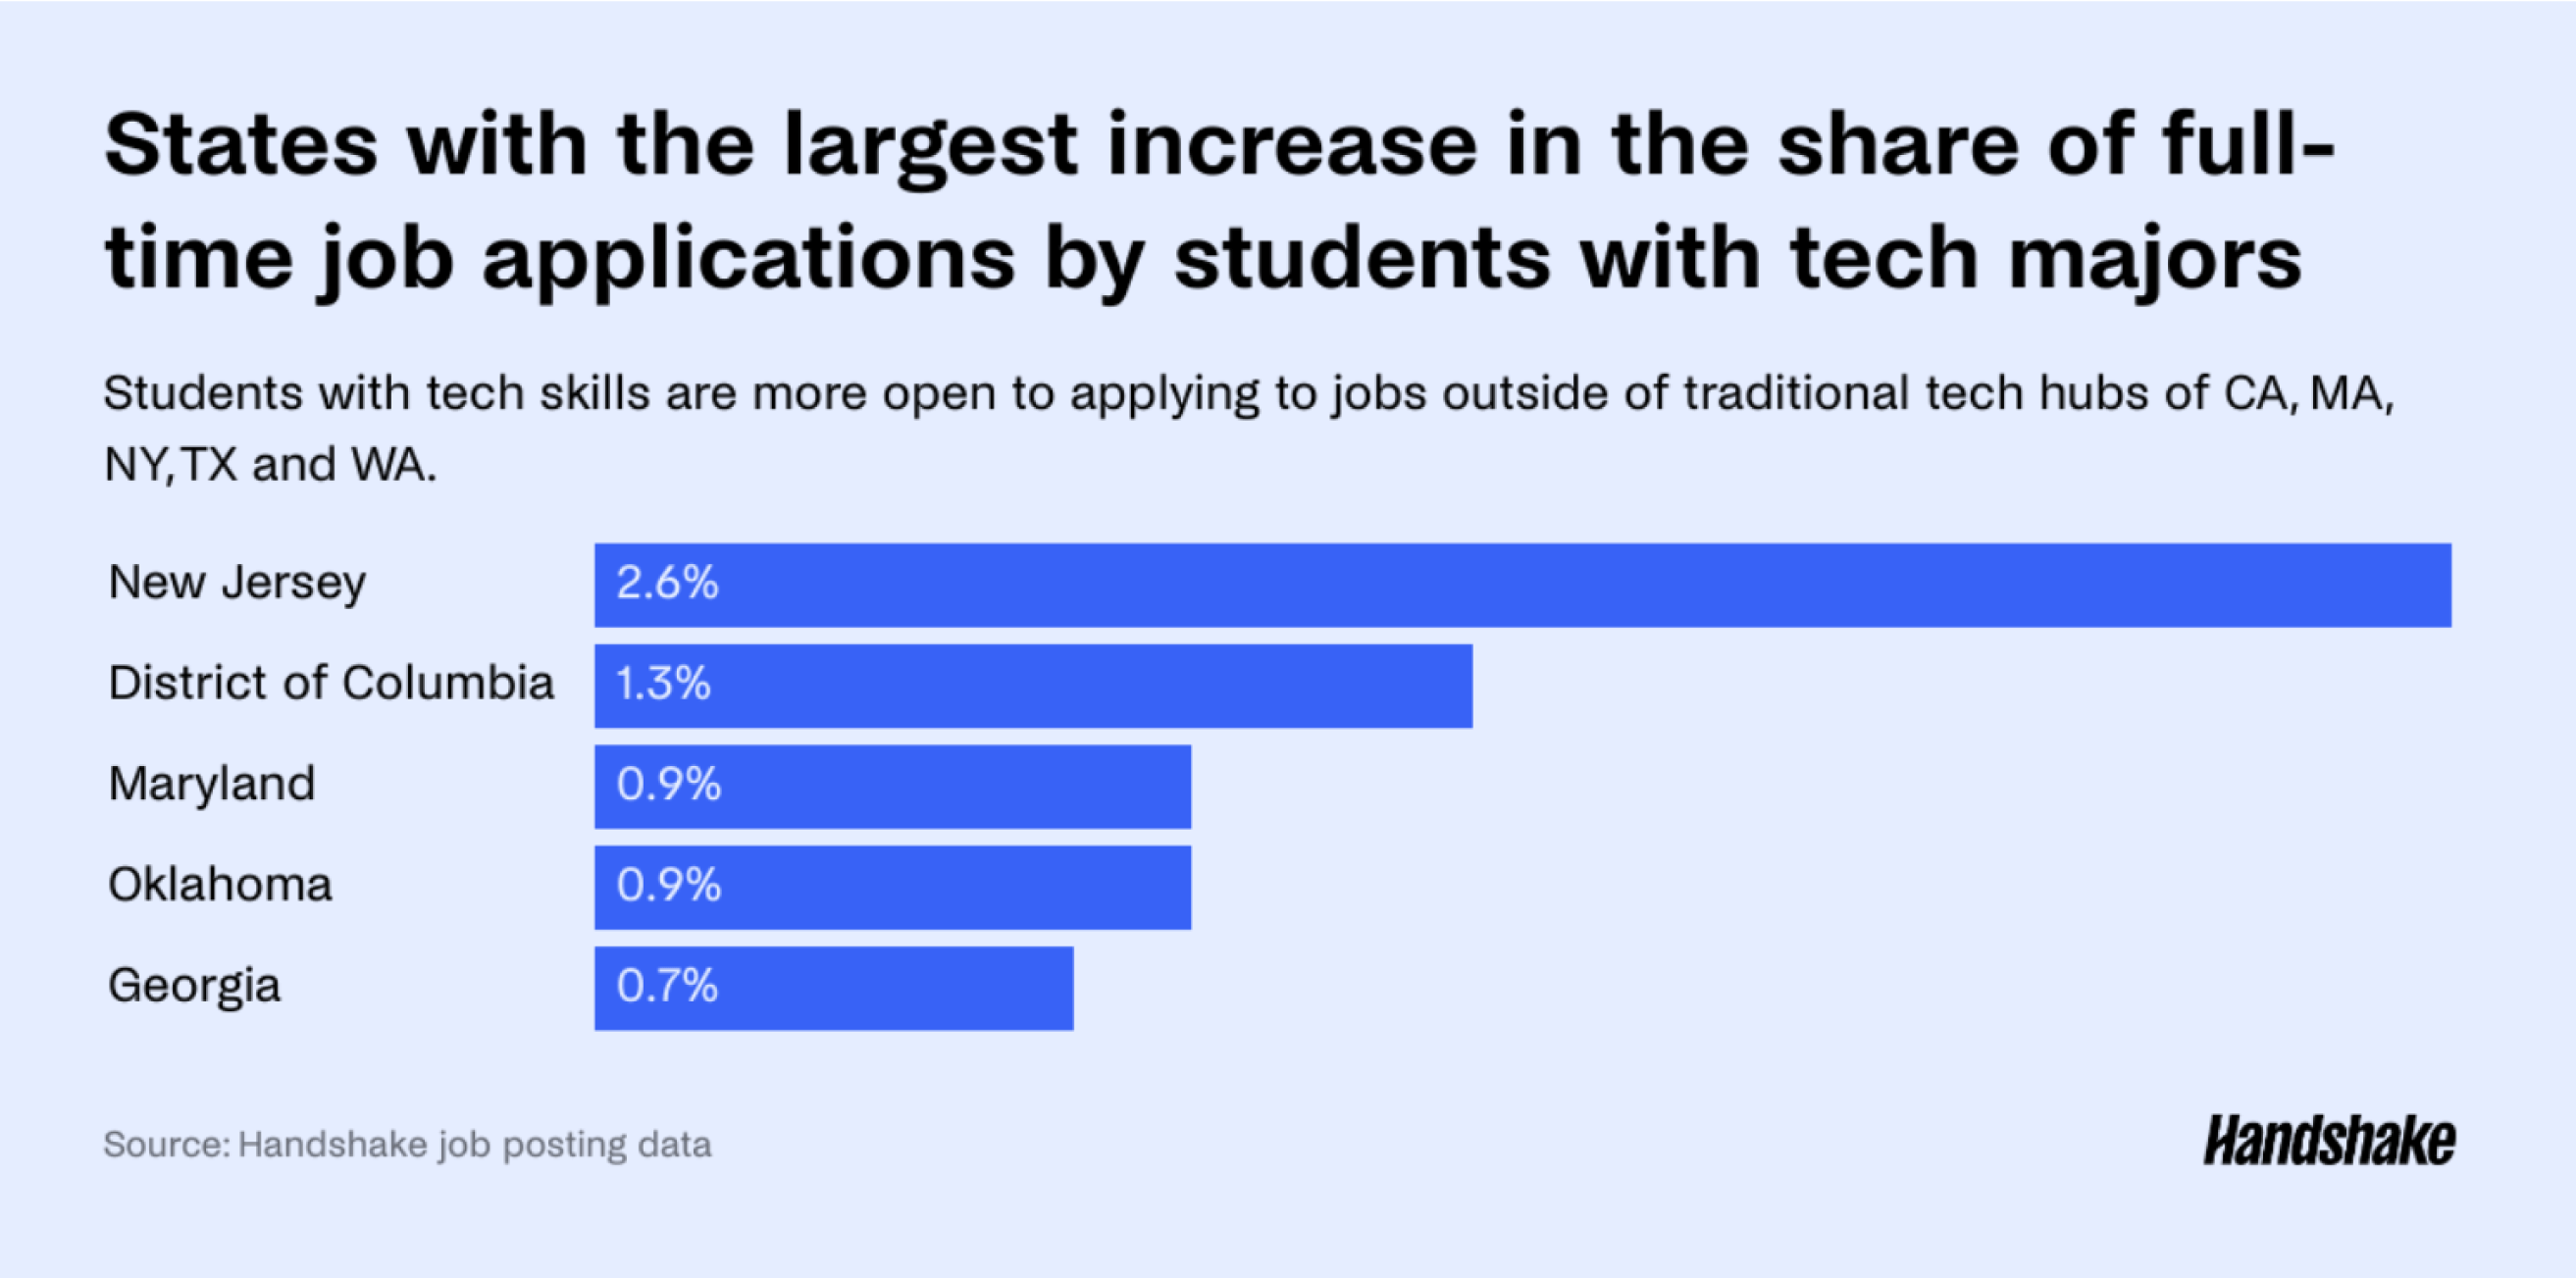 students with tech skills are more open to applying to jobs outside of traditionsl tech hubs of CA, MA, NY, and WA